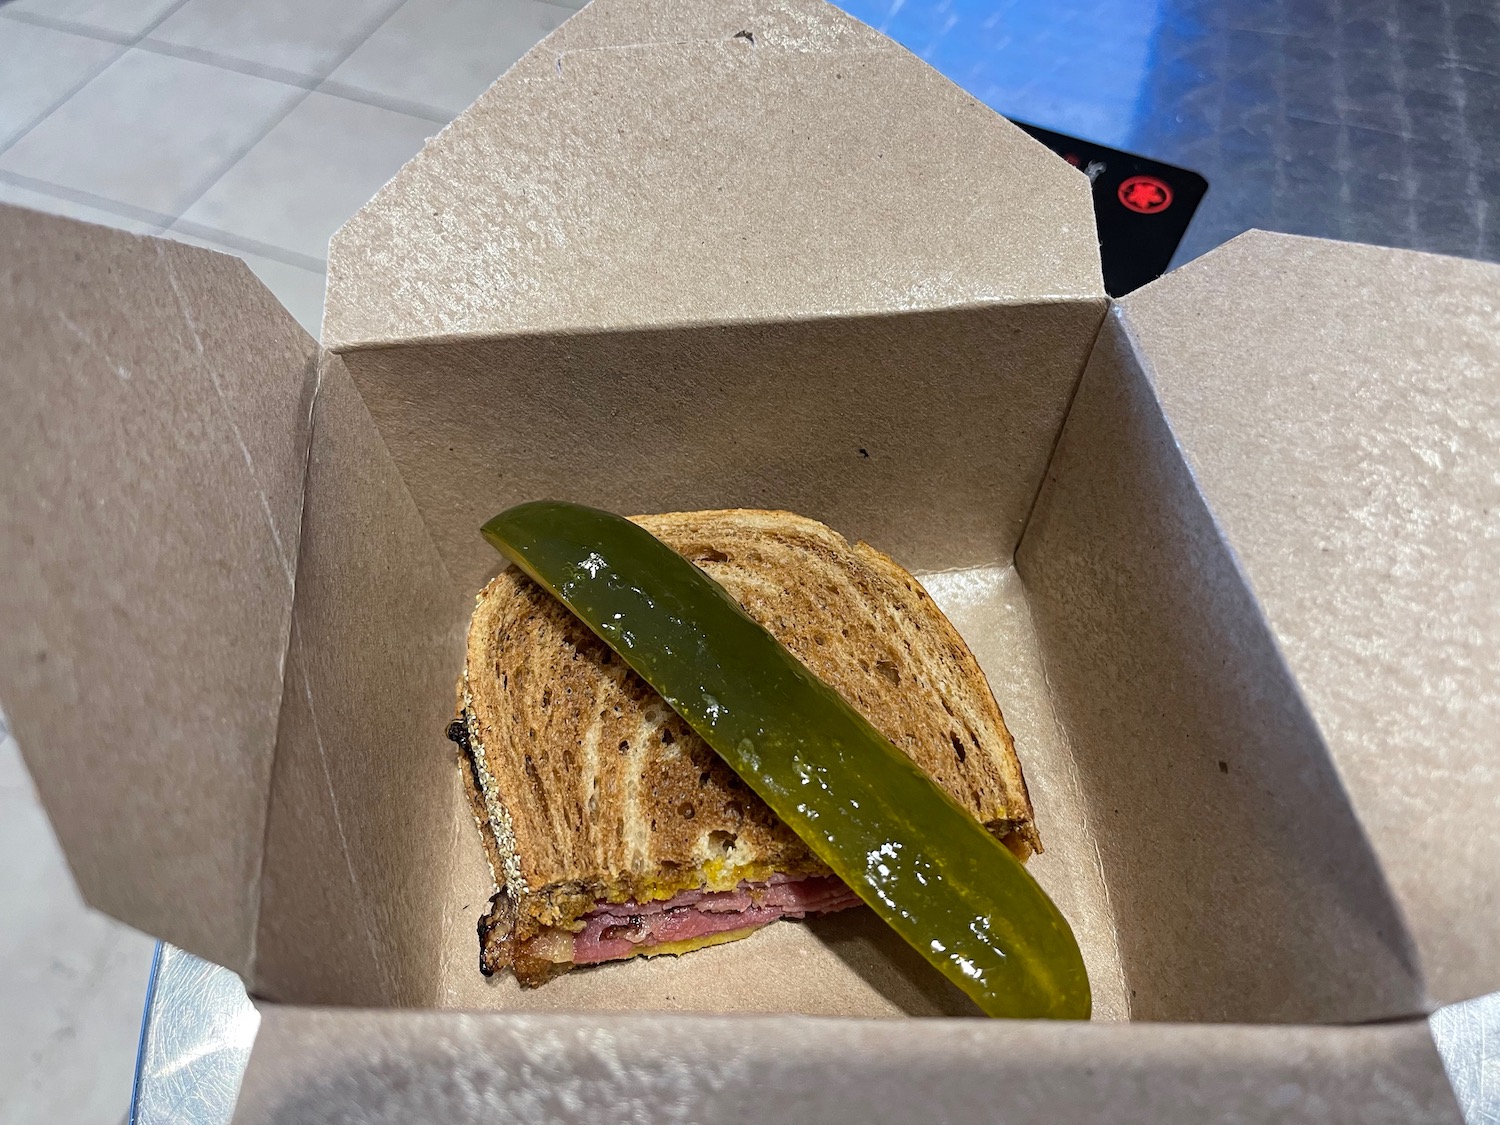 a sandwich and pickle in a box